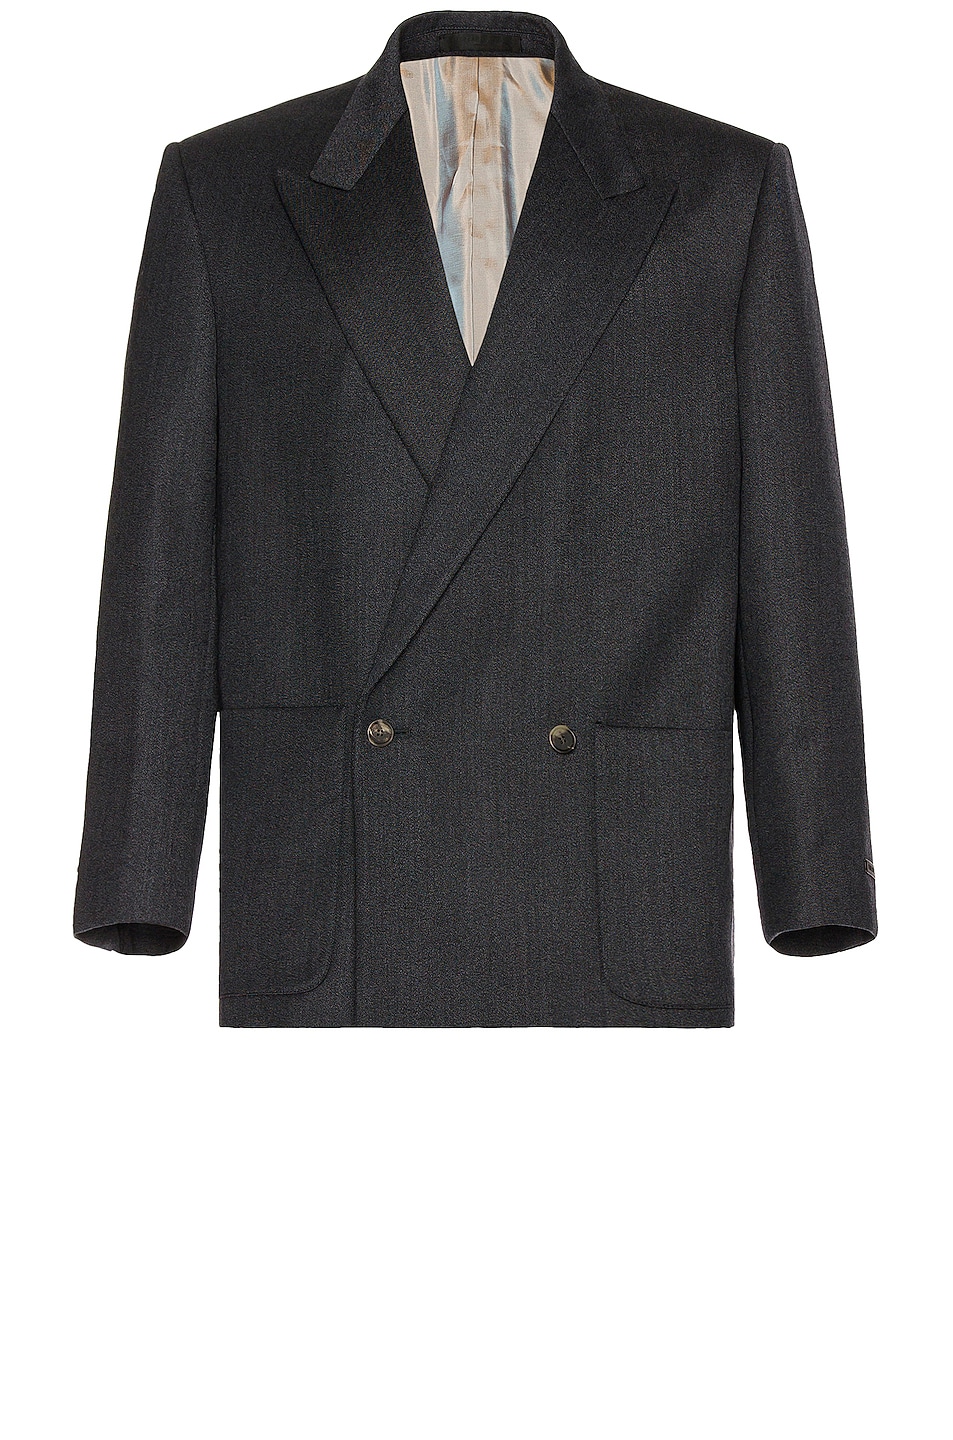 Image 1 of Fear of God The Suit Jacket in Charcoal